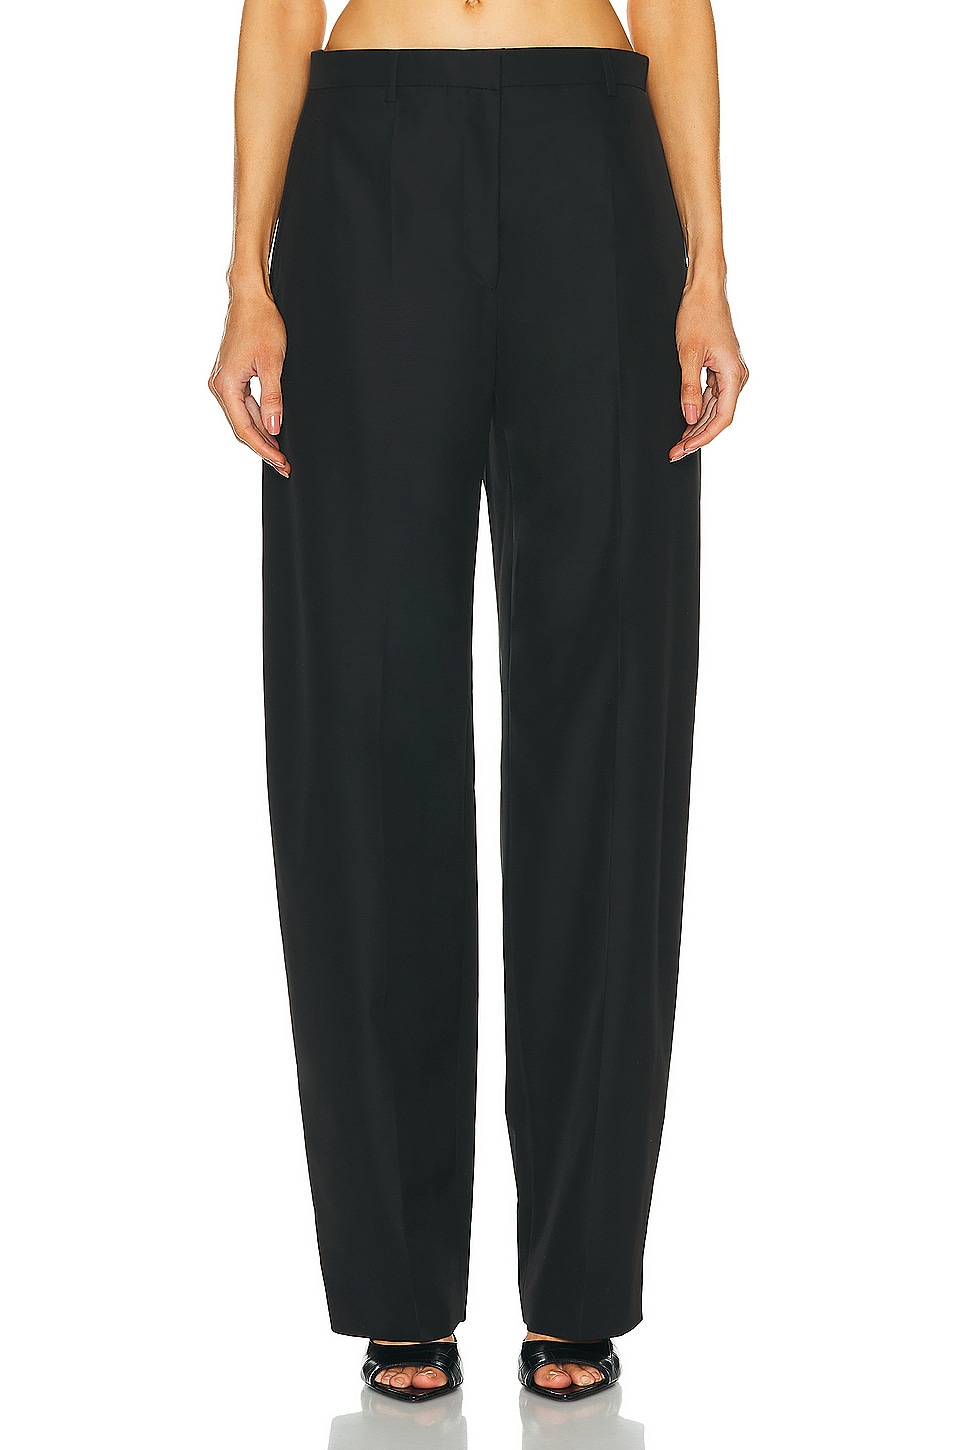 Image 1 of Alexander Wang Low Waisted Pant With Back Slits in Black